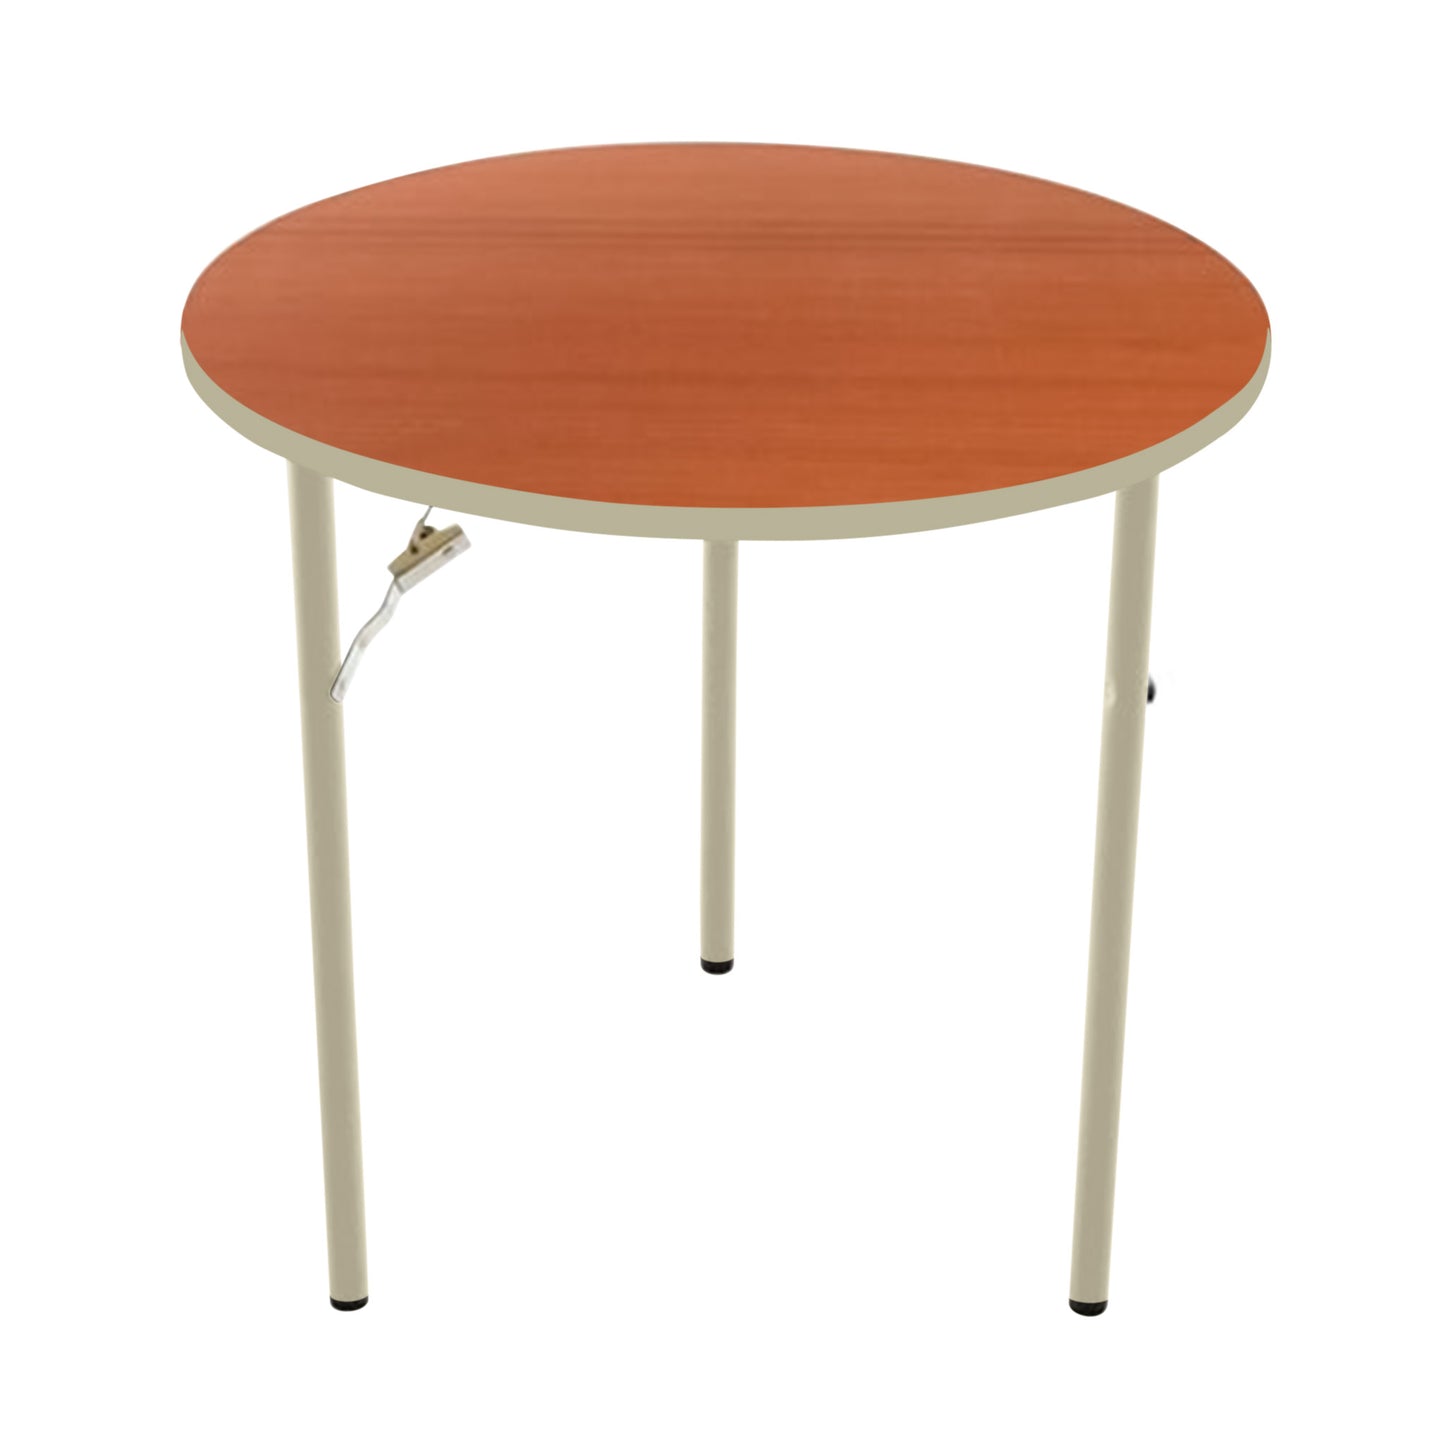 AmTab Folding Table - Plywood Stained and Sealed - Vinyl T-Molding Edge - Round - 72" Diameter x 29"H  (AmTab AMT-R72PM)